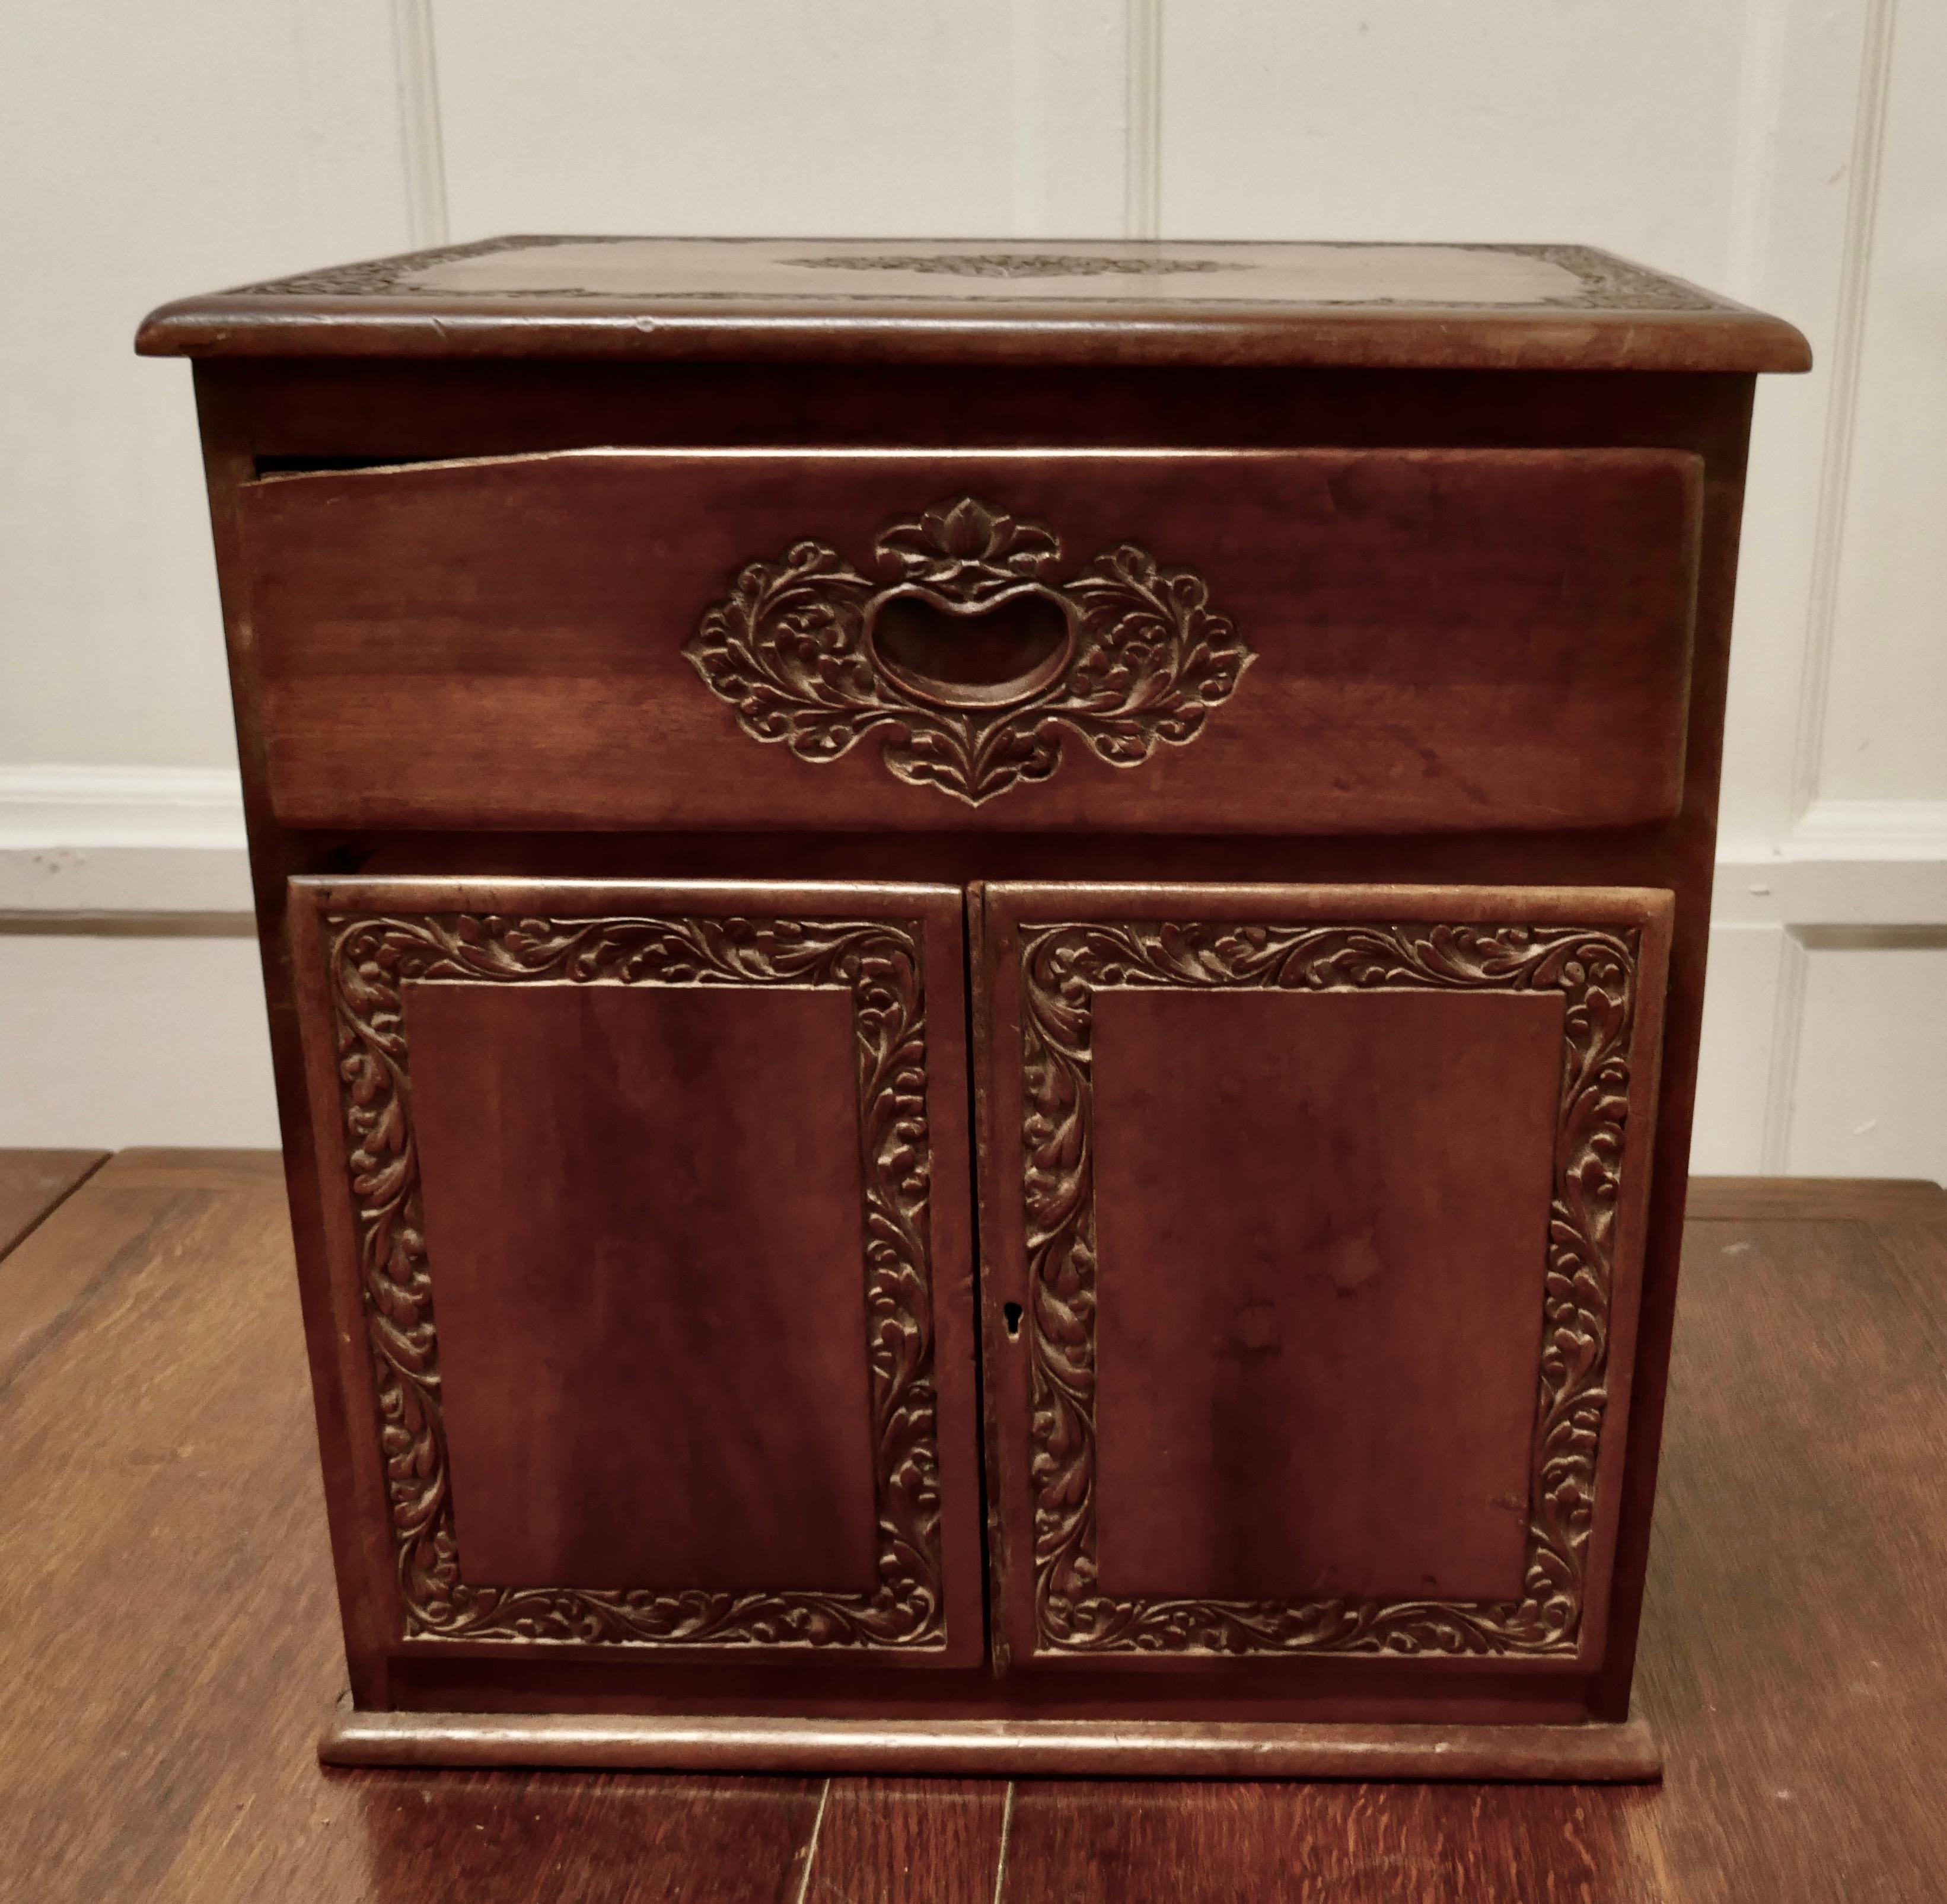 Small Carved Cupboard with Drawer 

A Charming little piece made in Teak, the cabinet has a 2 door cupboard with along drawer above
A charming craftsman made piece showing the skill of the carver with detailed decoration on all sides
This piece